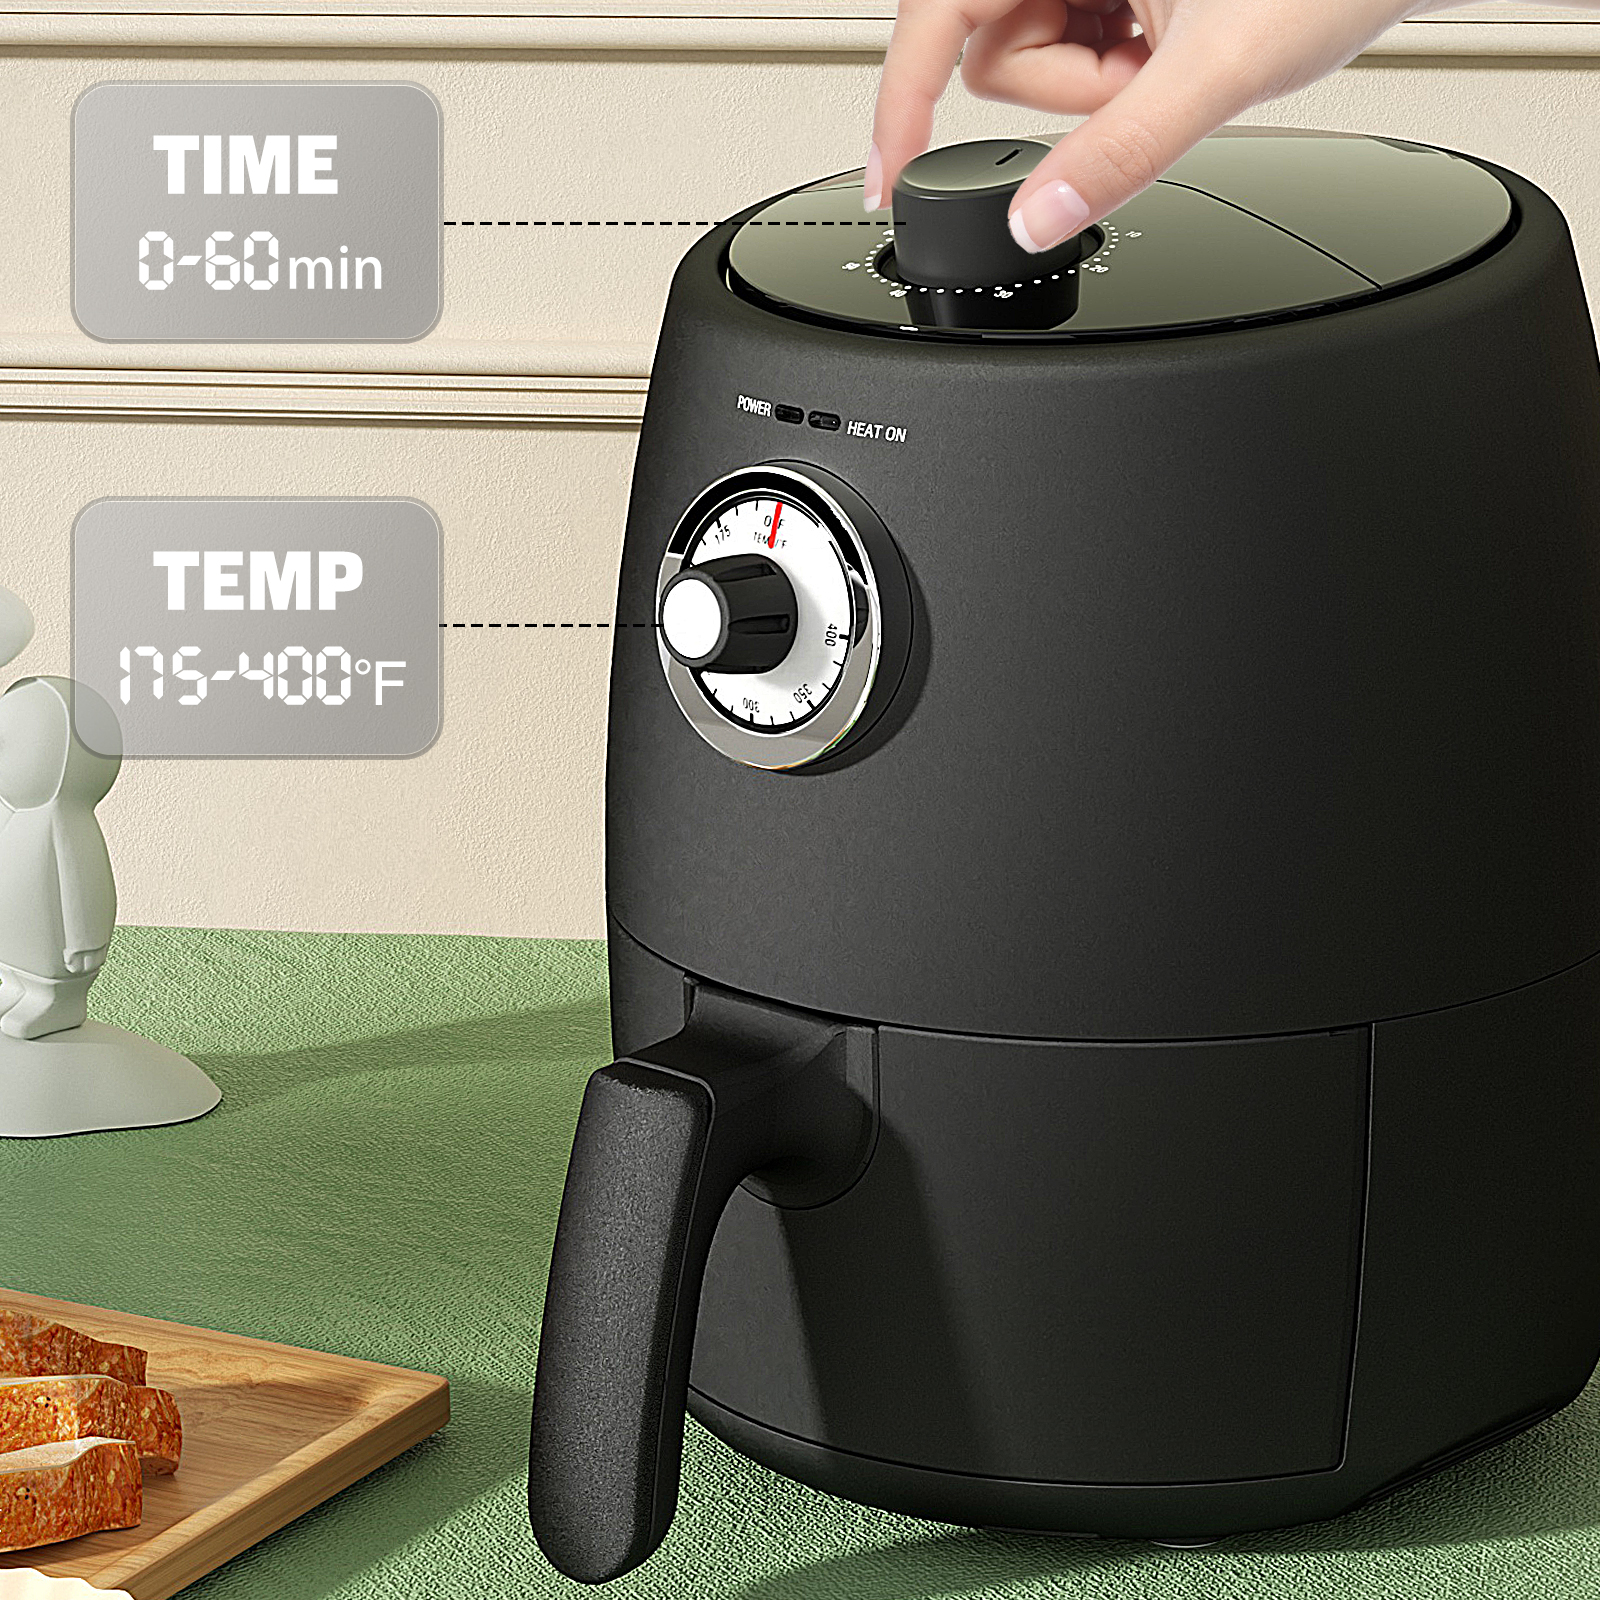 MOOSOO Small Air Fryer, 2 Quart Electric Oil-Less Air Fryer Oven Cooker with Air Fryer Liner, Cookbook - image 3 of 8